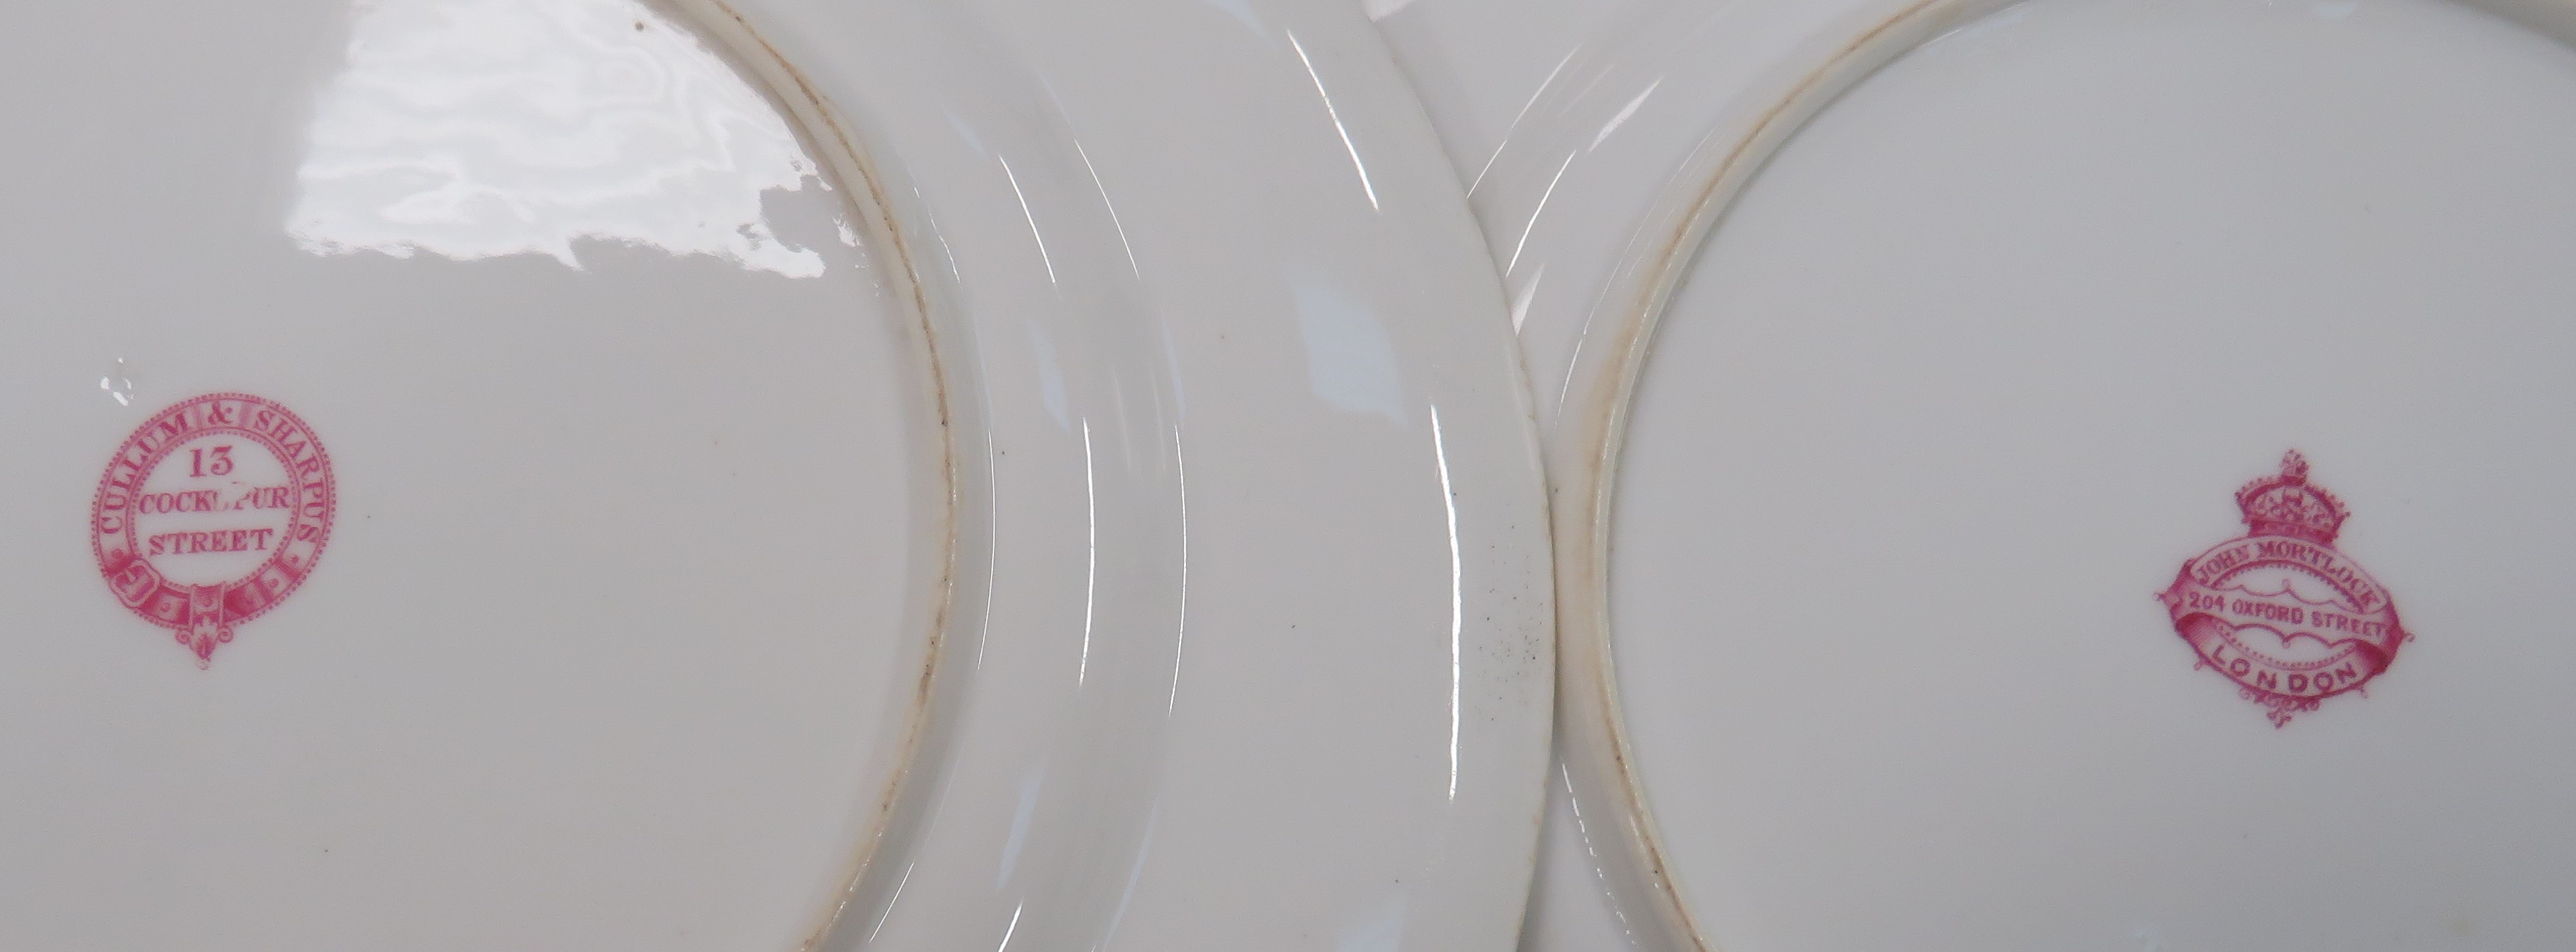 Victorian Royal Bodyguard Dinner Plates 10 inch, white glazed china plates with Victorian crown - Image 3 of 3